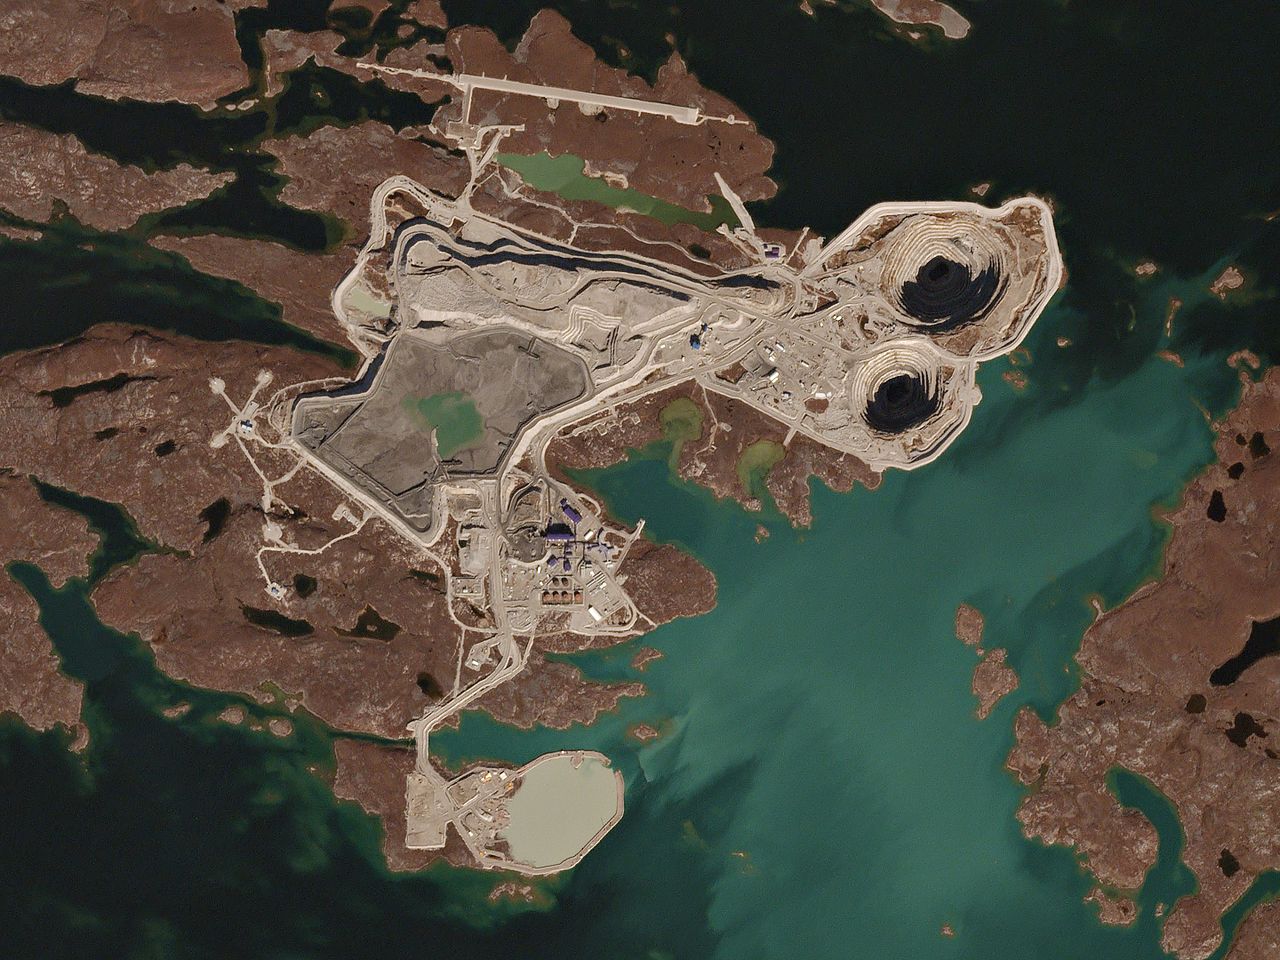 The Diavik diamond mine in Canada, shown here, is a large scale operation.